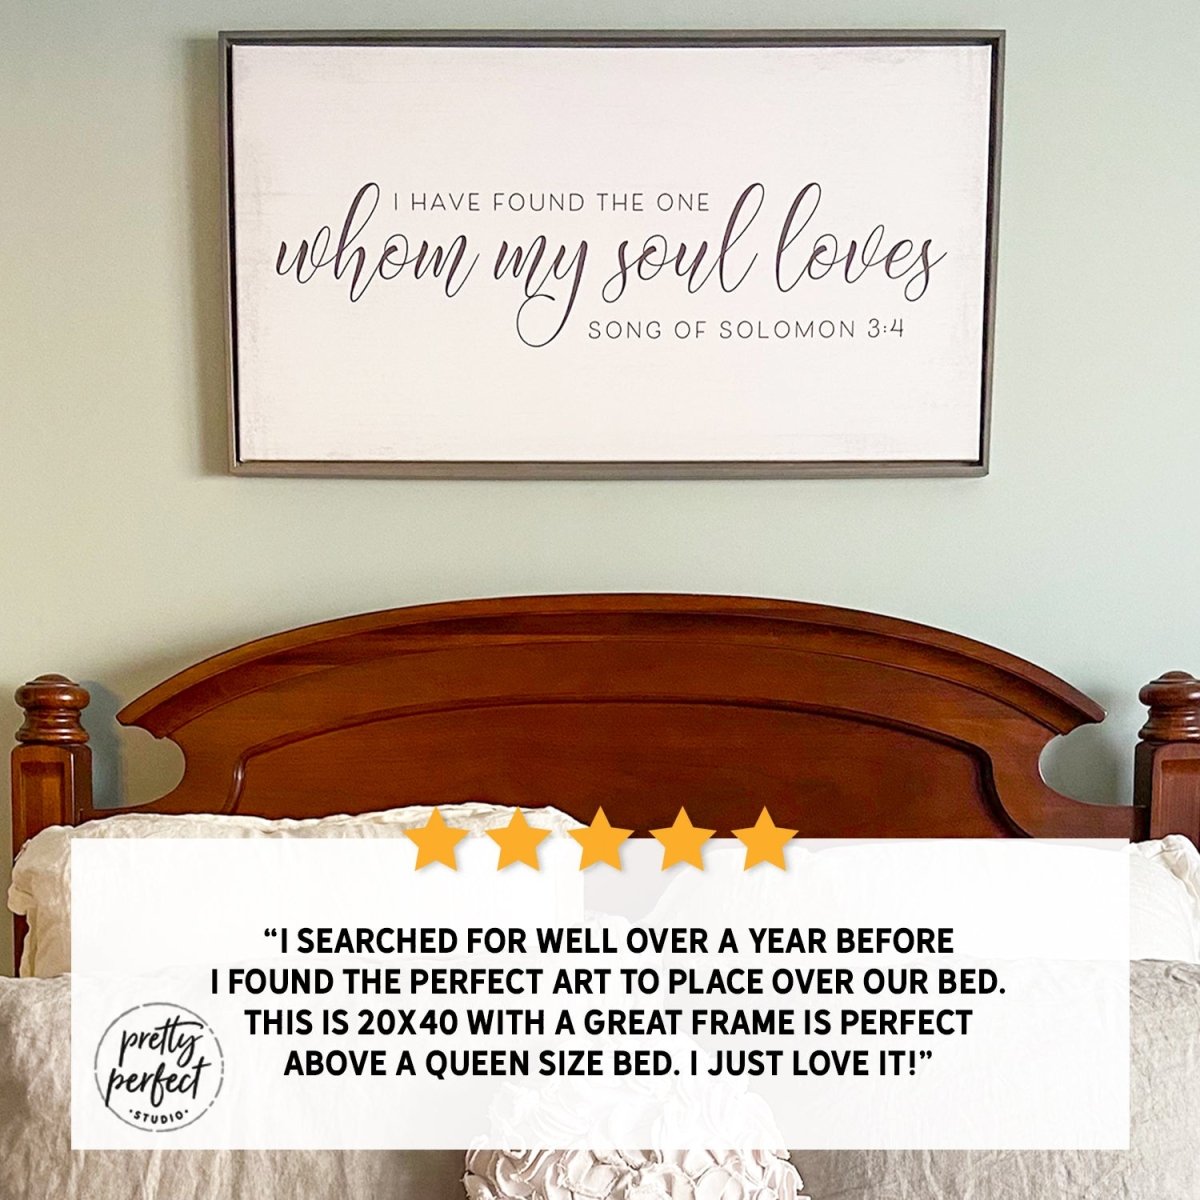 Customer product review for I have found the one bible scripture sign by Pretty Perfect Studio